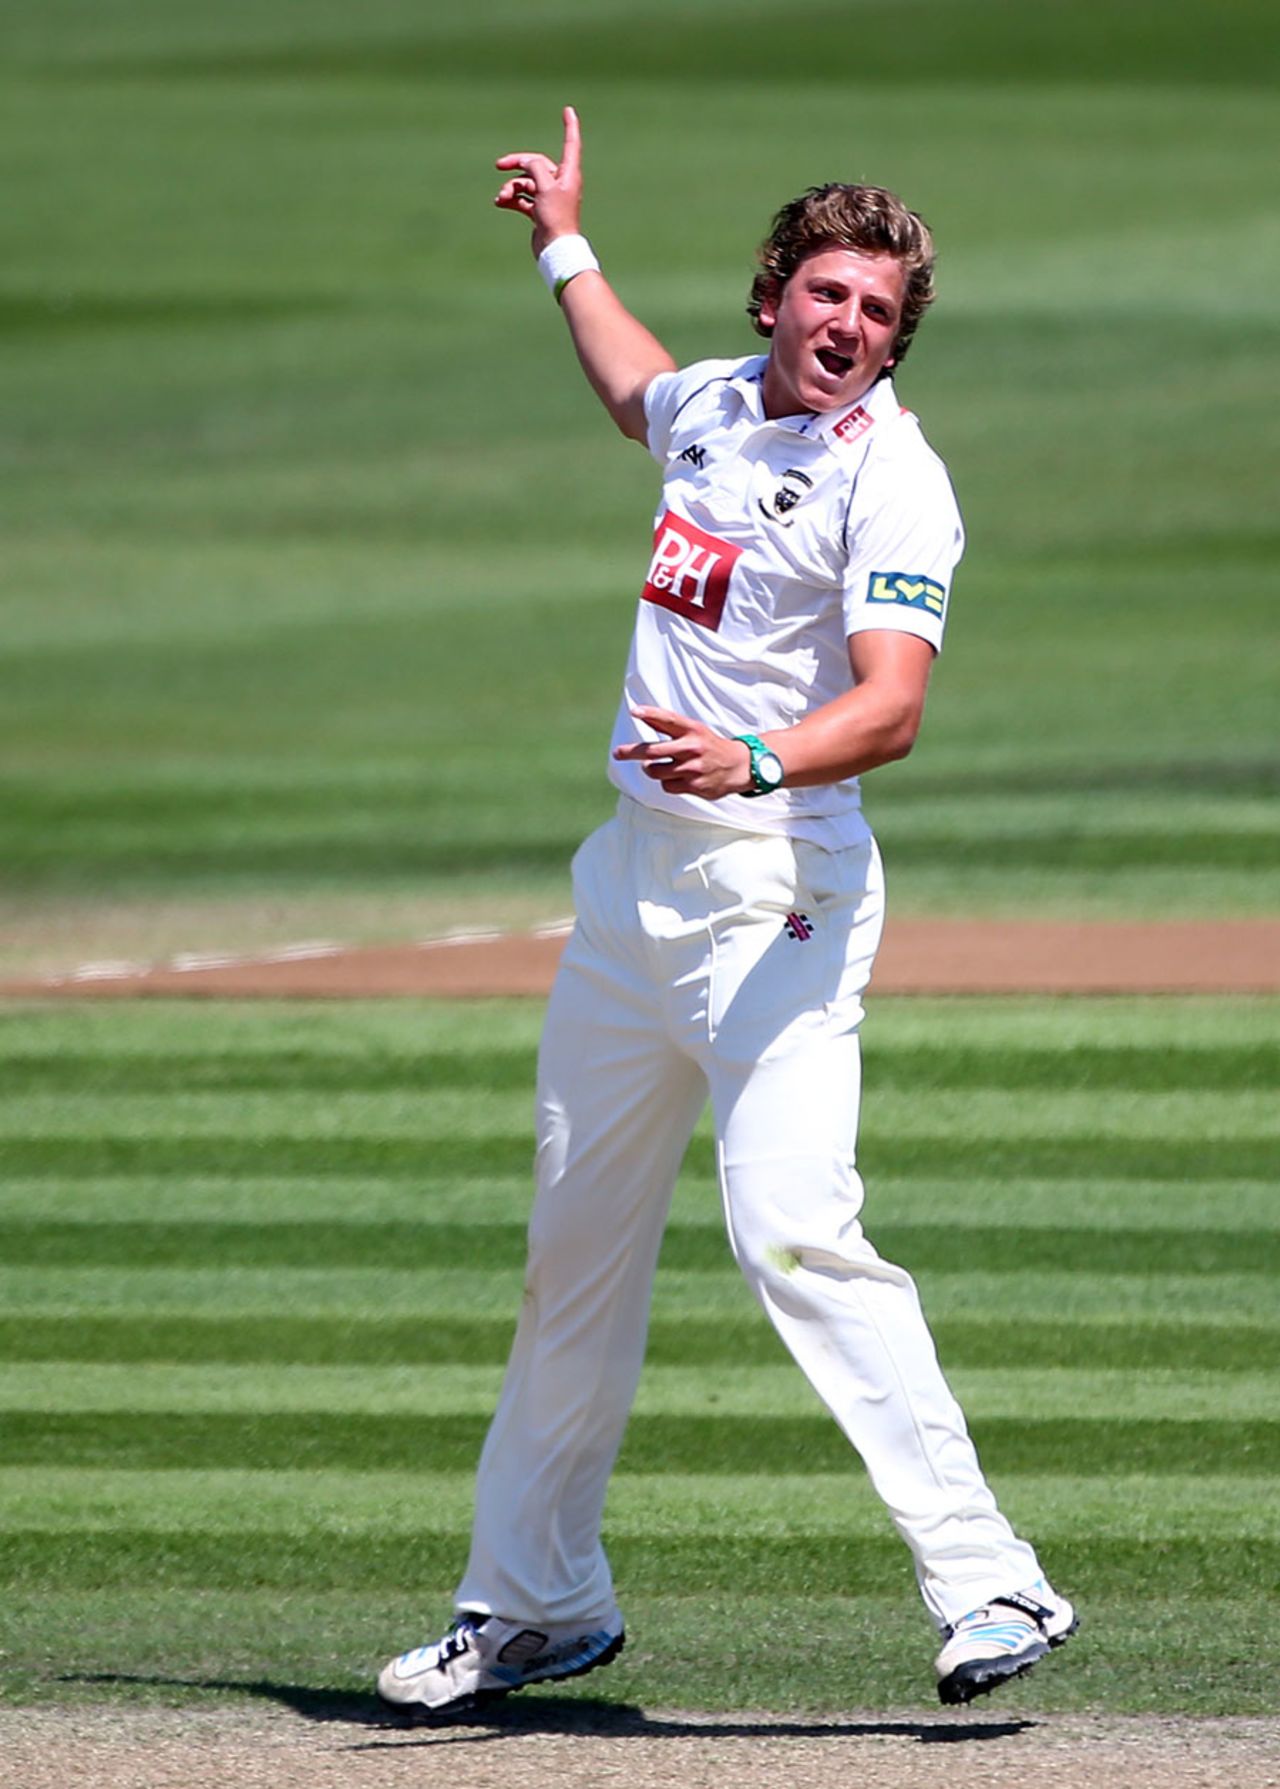 Matthew Hobden claimed 2 for 34, Sussex v Northamptonshire, County Championship Division One, Hove, 2nd day, July 7, 2014